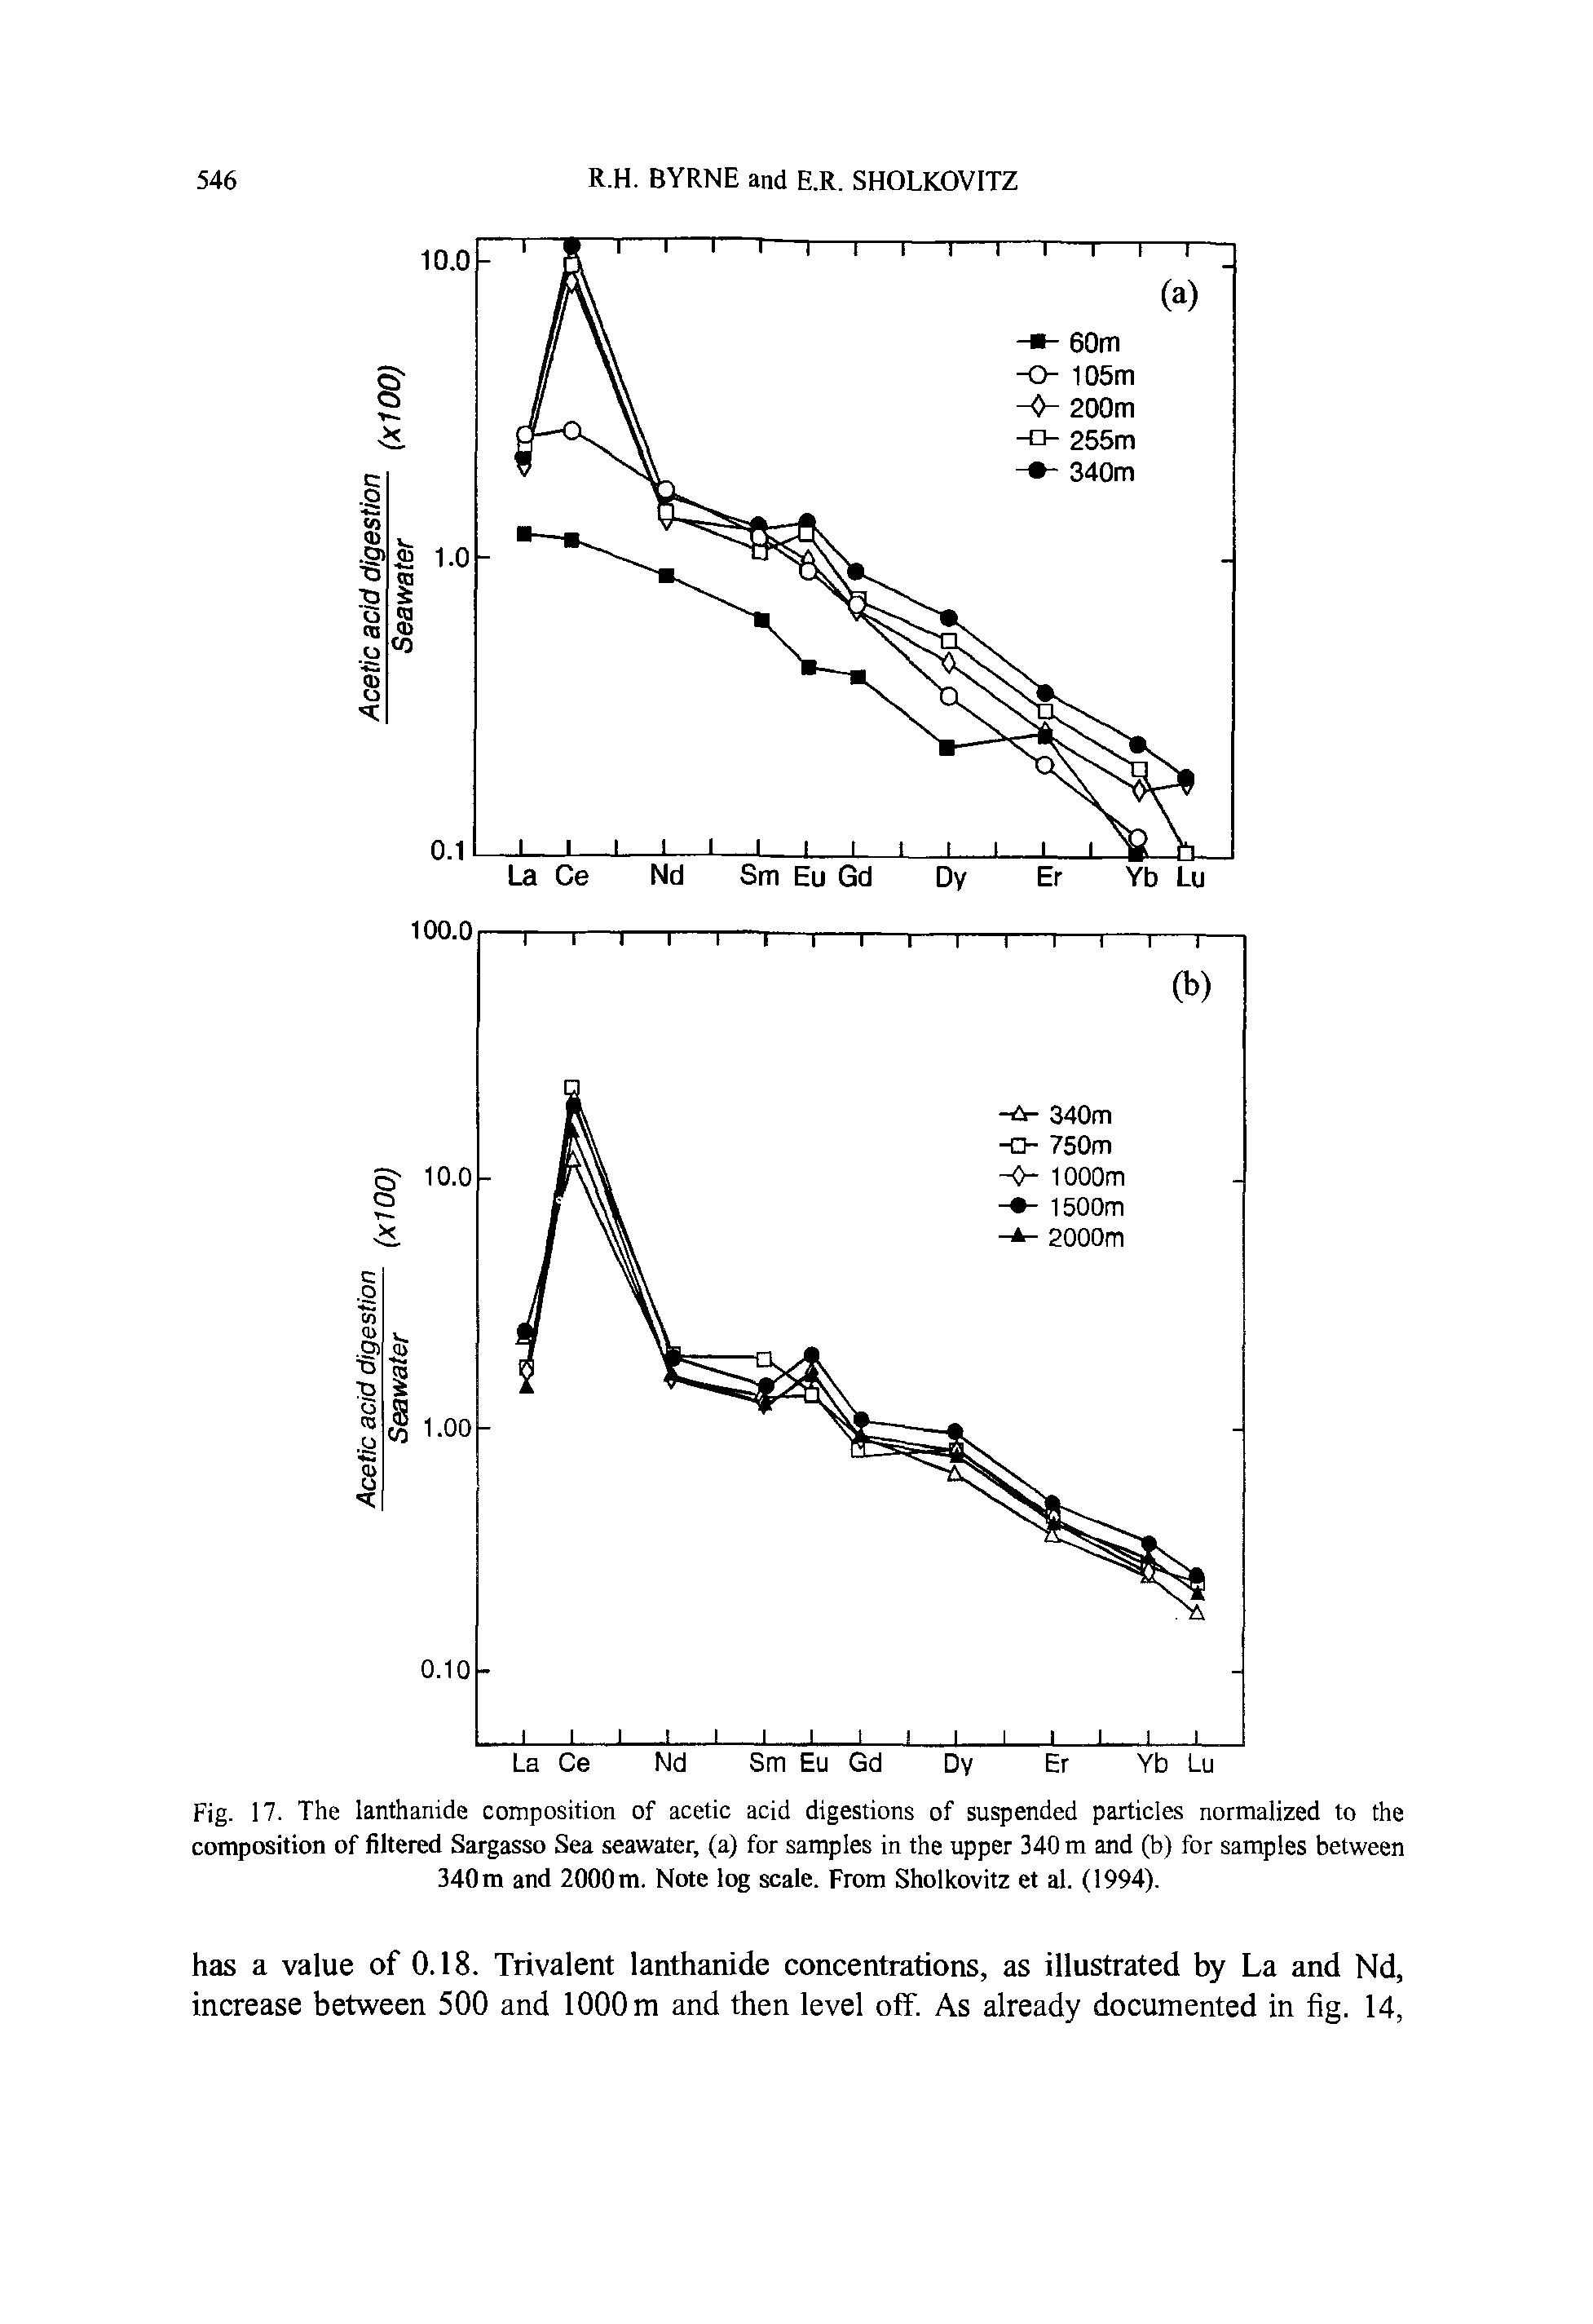 Fig. 17. The lanthanide composition of acetic acid digestions of suspended particles normalized to the composition of filtered Sargasso Sea seawater, (a) for samples in the upper 340 m and (b) for samples between 340 m and 2000 m. Note log scale. From Sholkovitz et al. (1994).